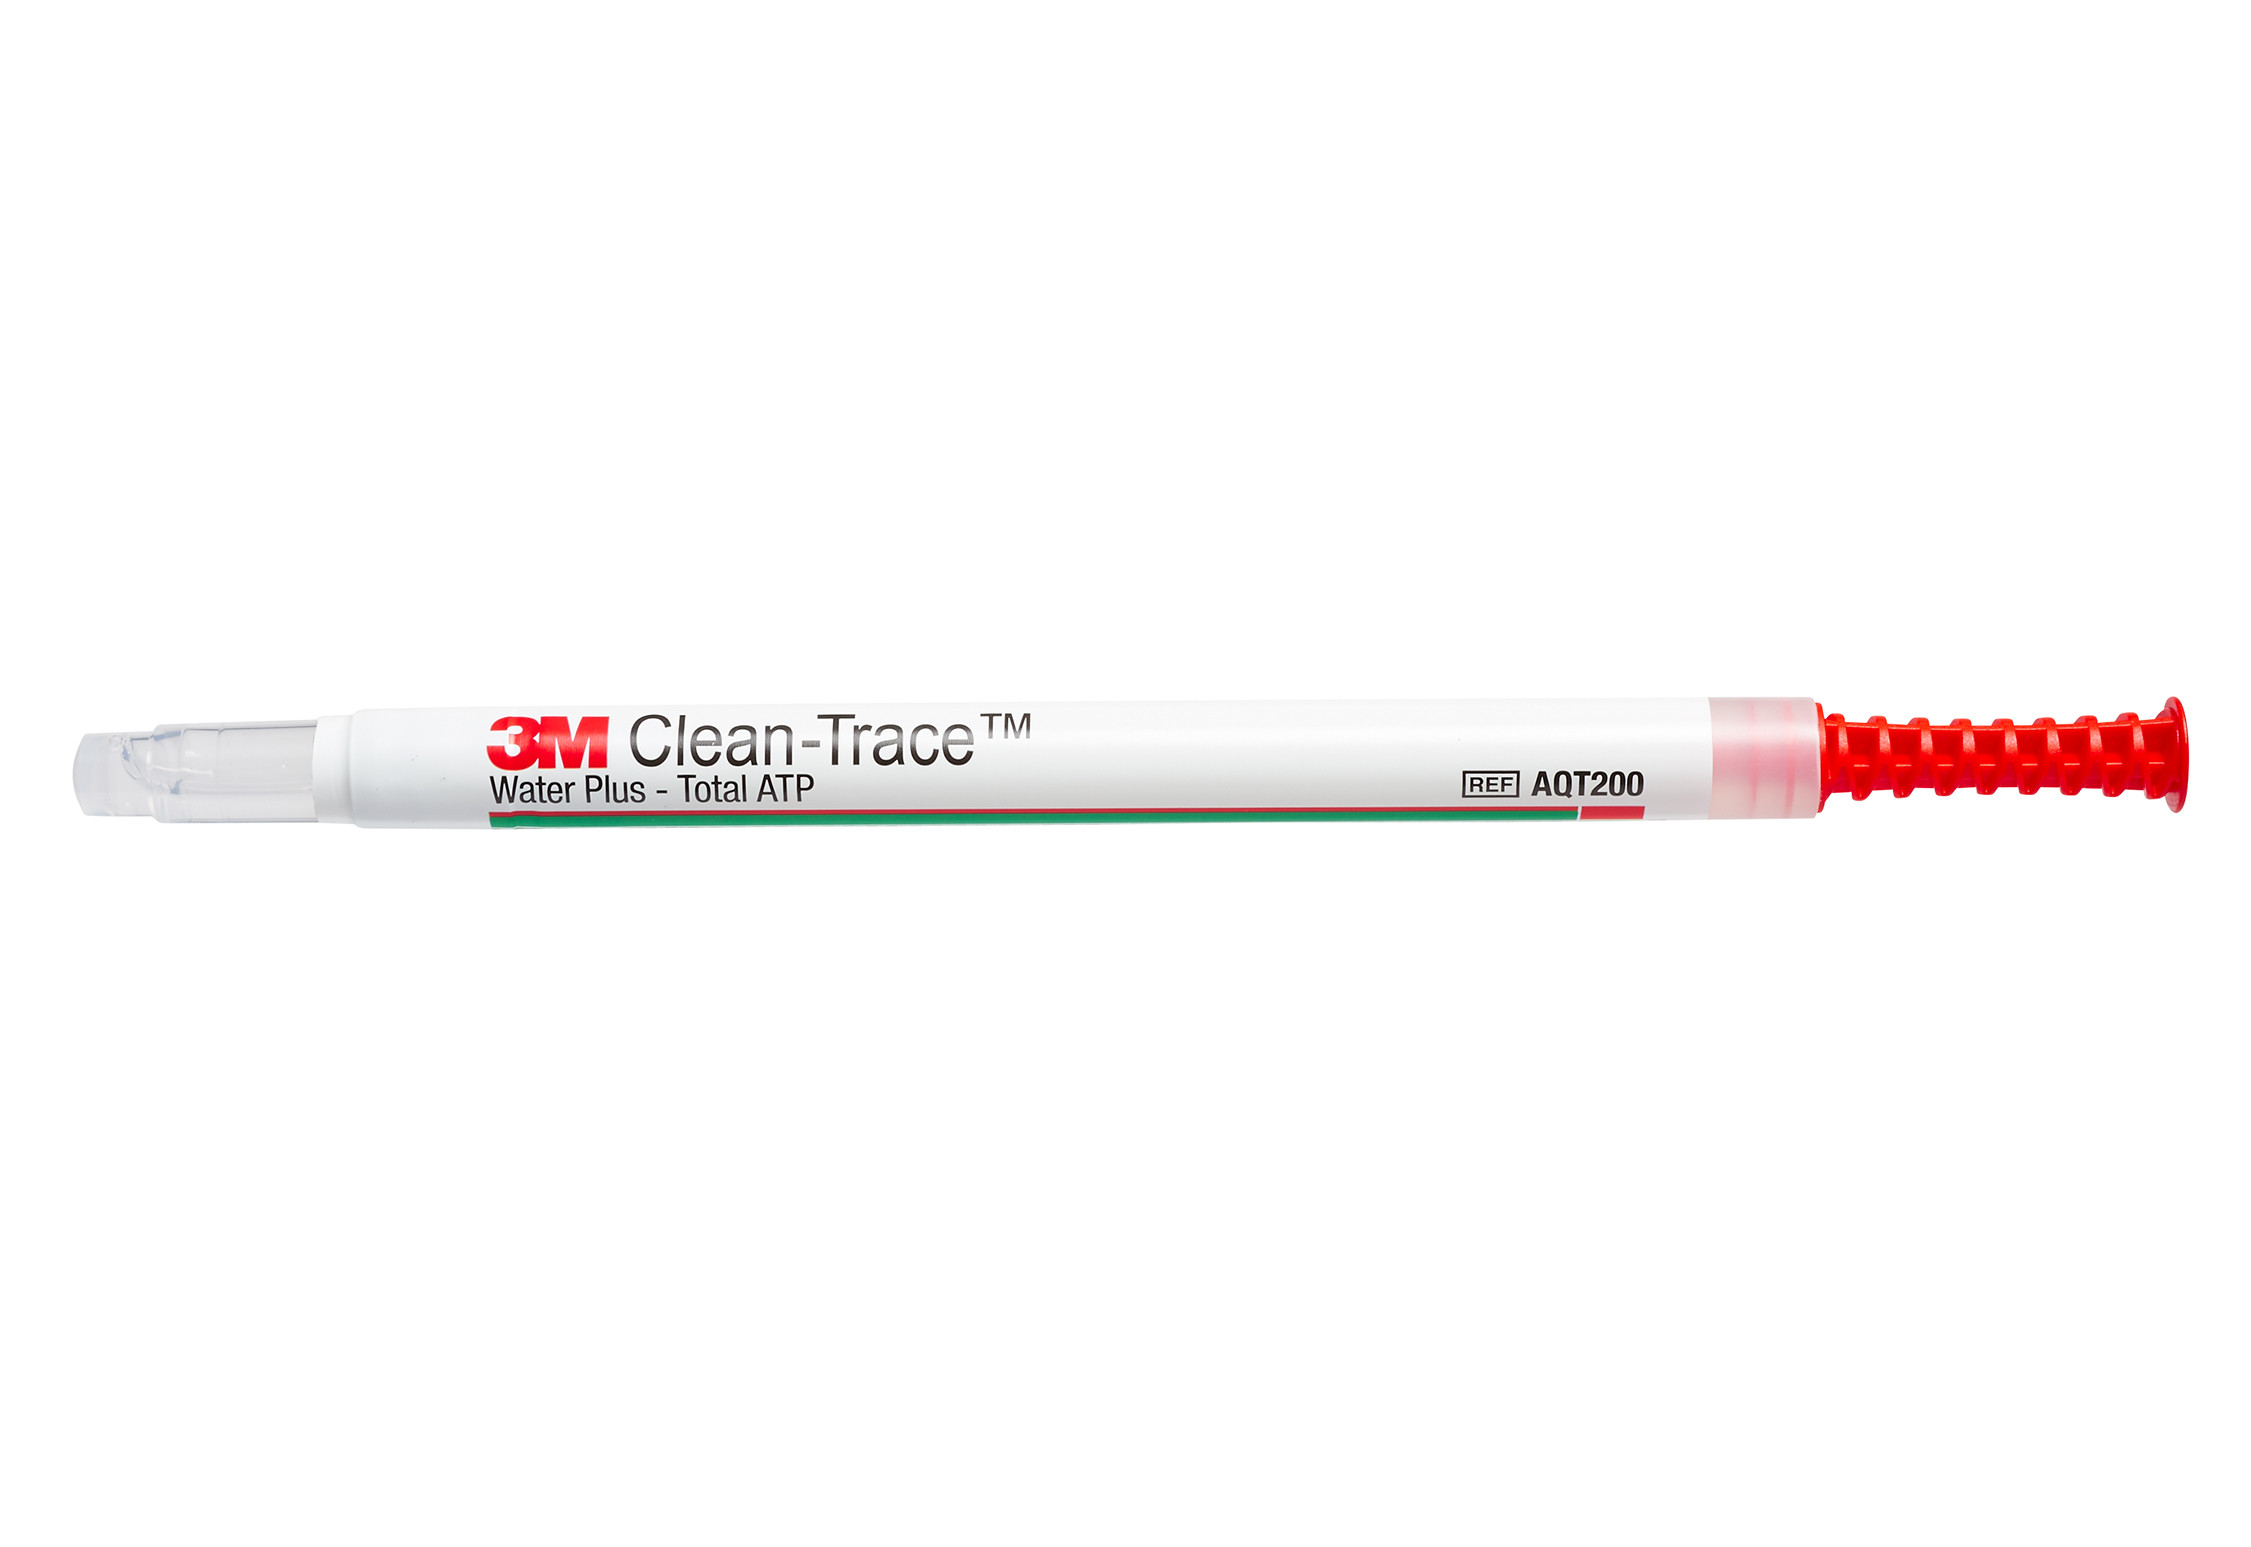 3M™ Clean-Trace™ Water Plus - Total ATP